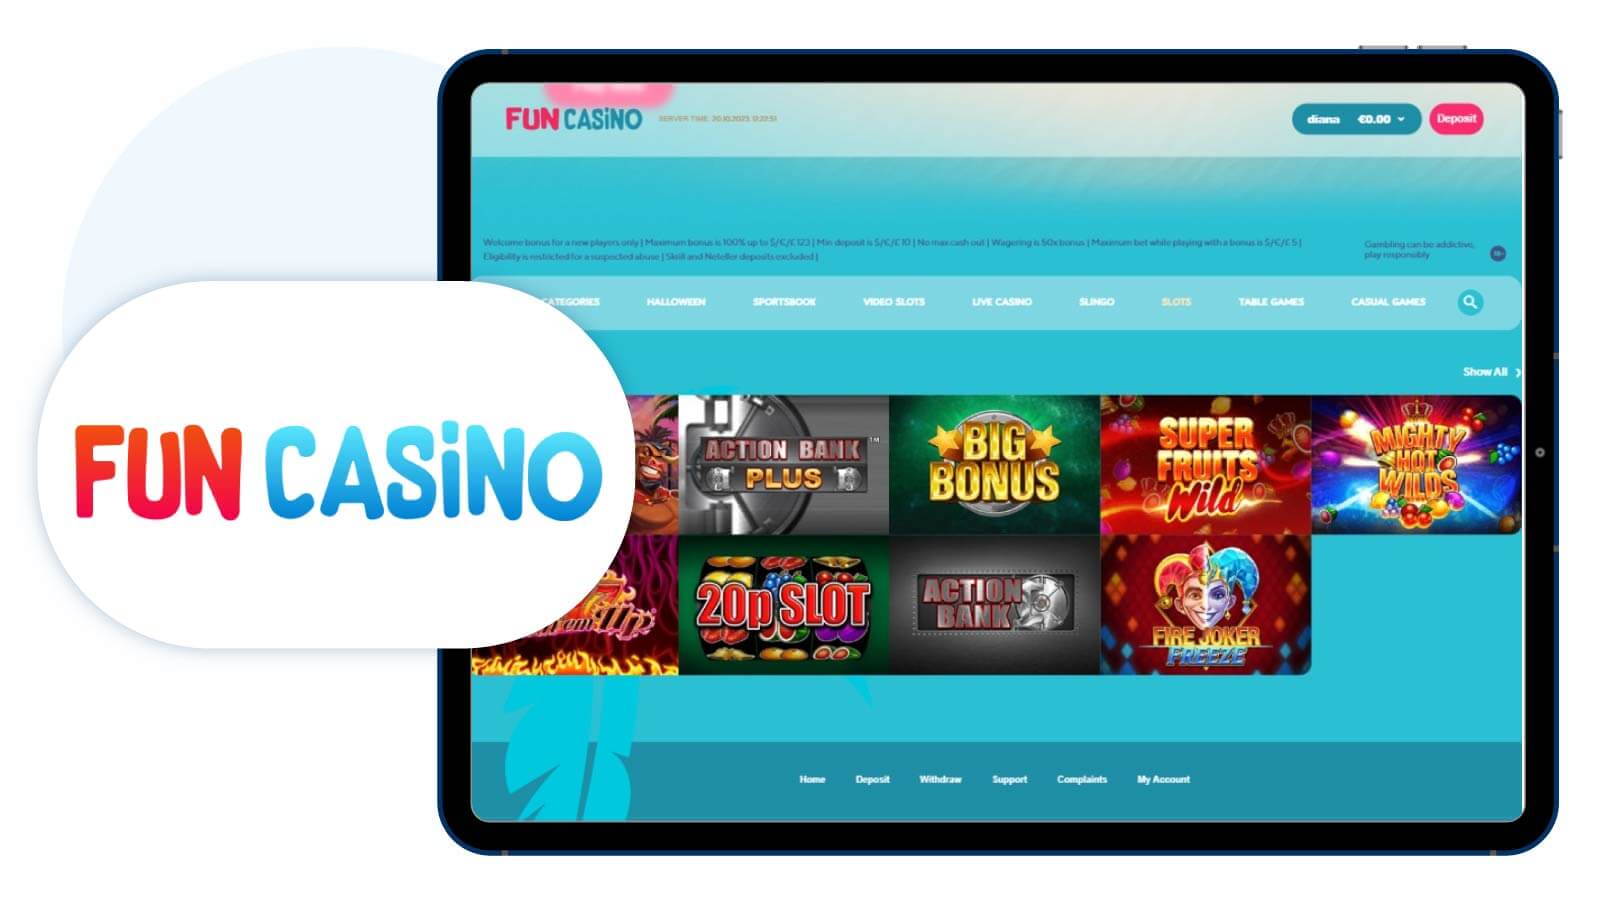 Fun Casino Worthwhile EcoPayz Casino with Free Spins on Registration